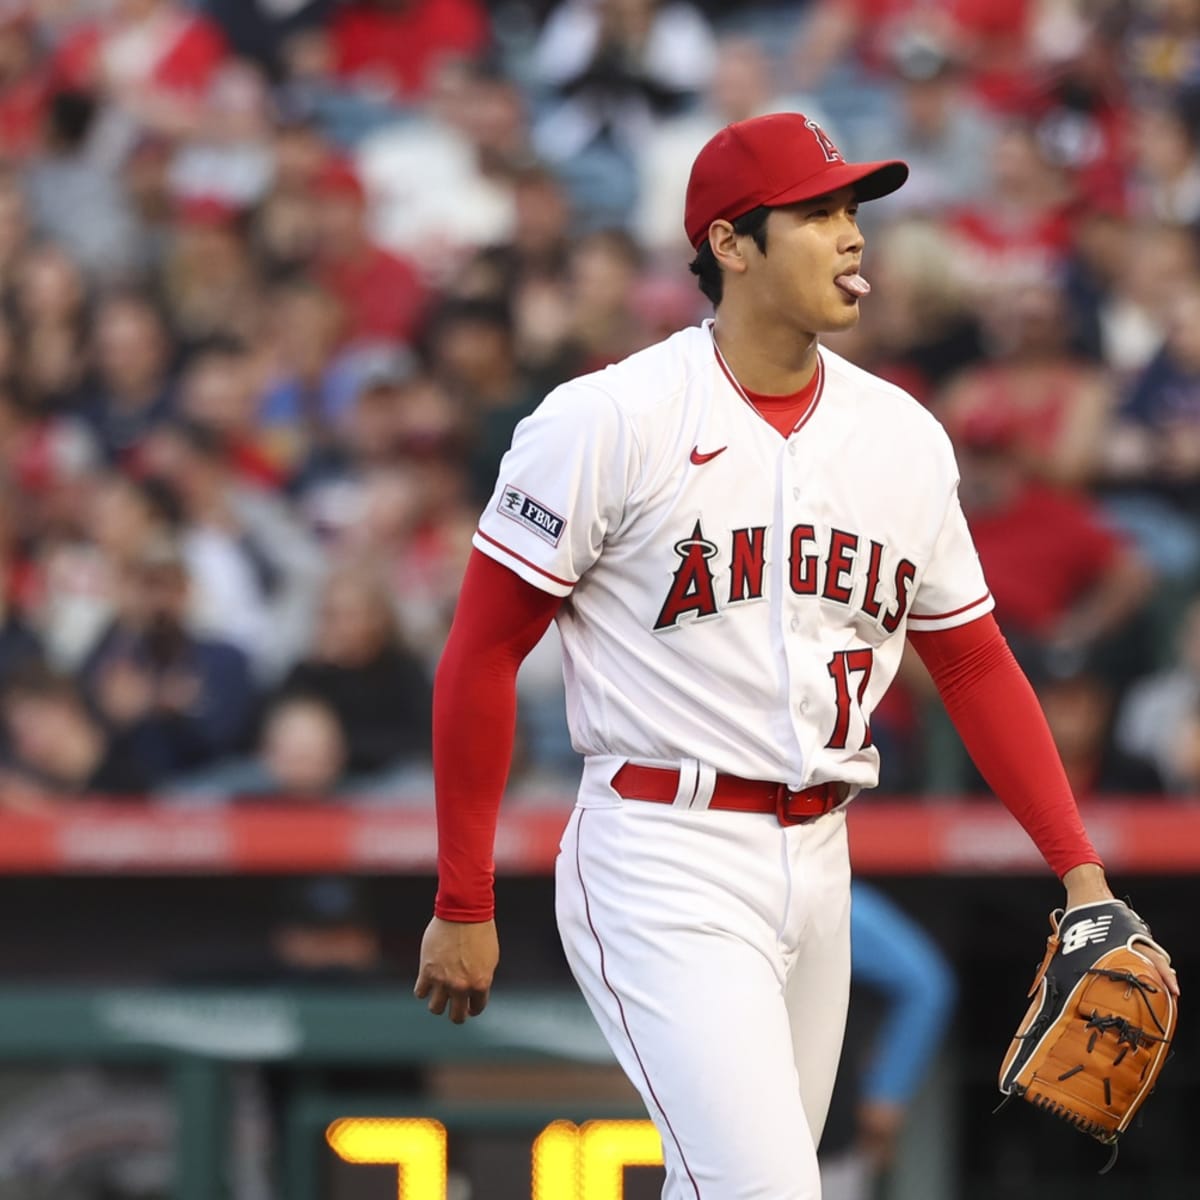 Reasons for Angels' Shohei Ohtani decision revealed